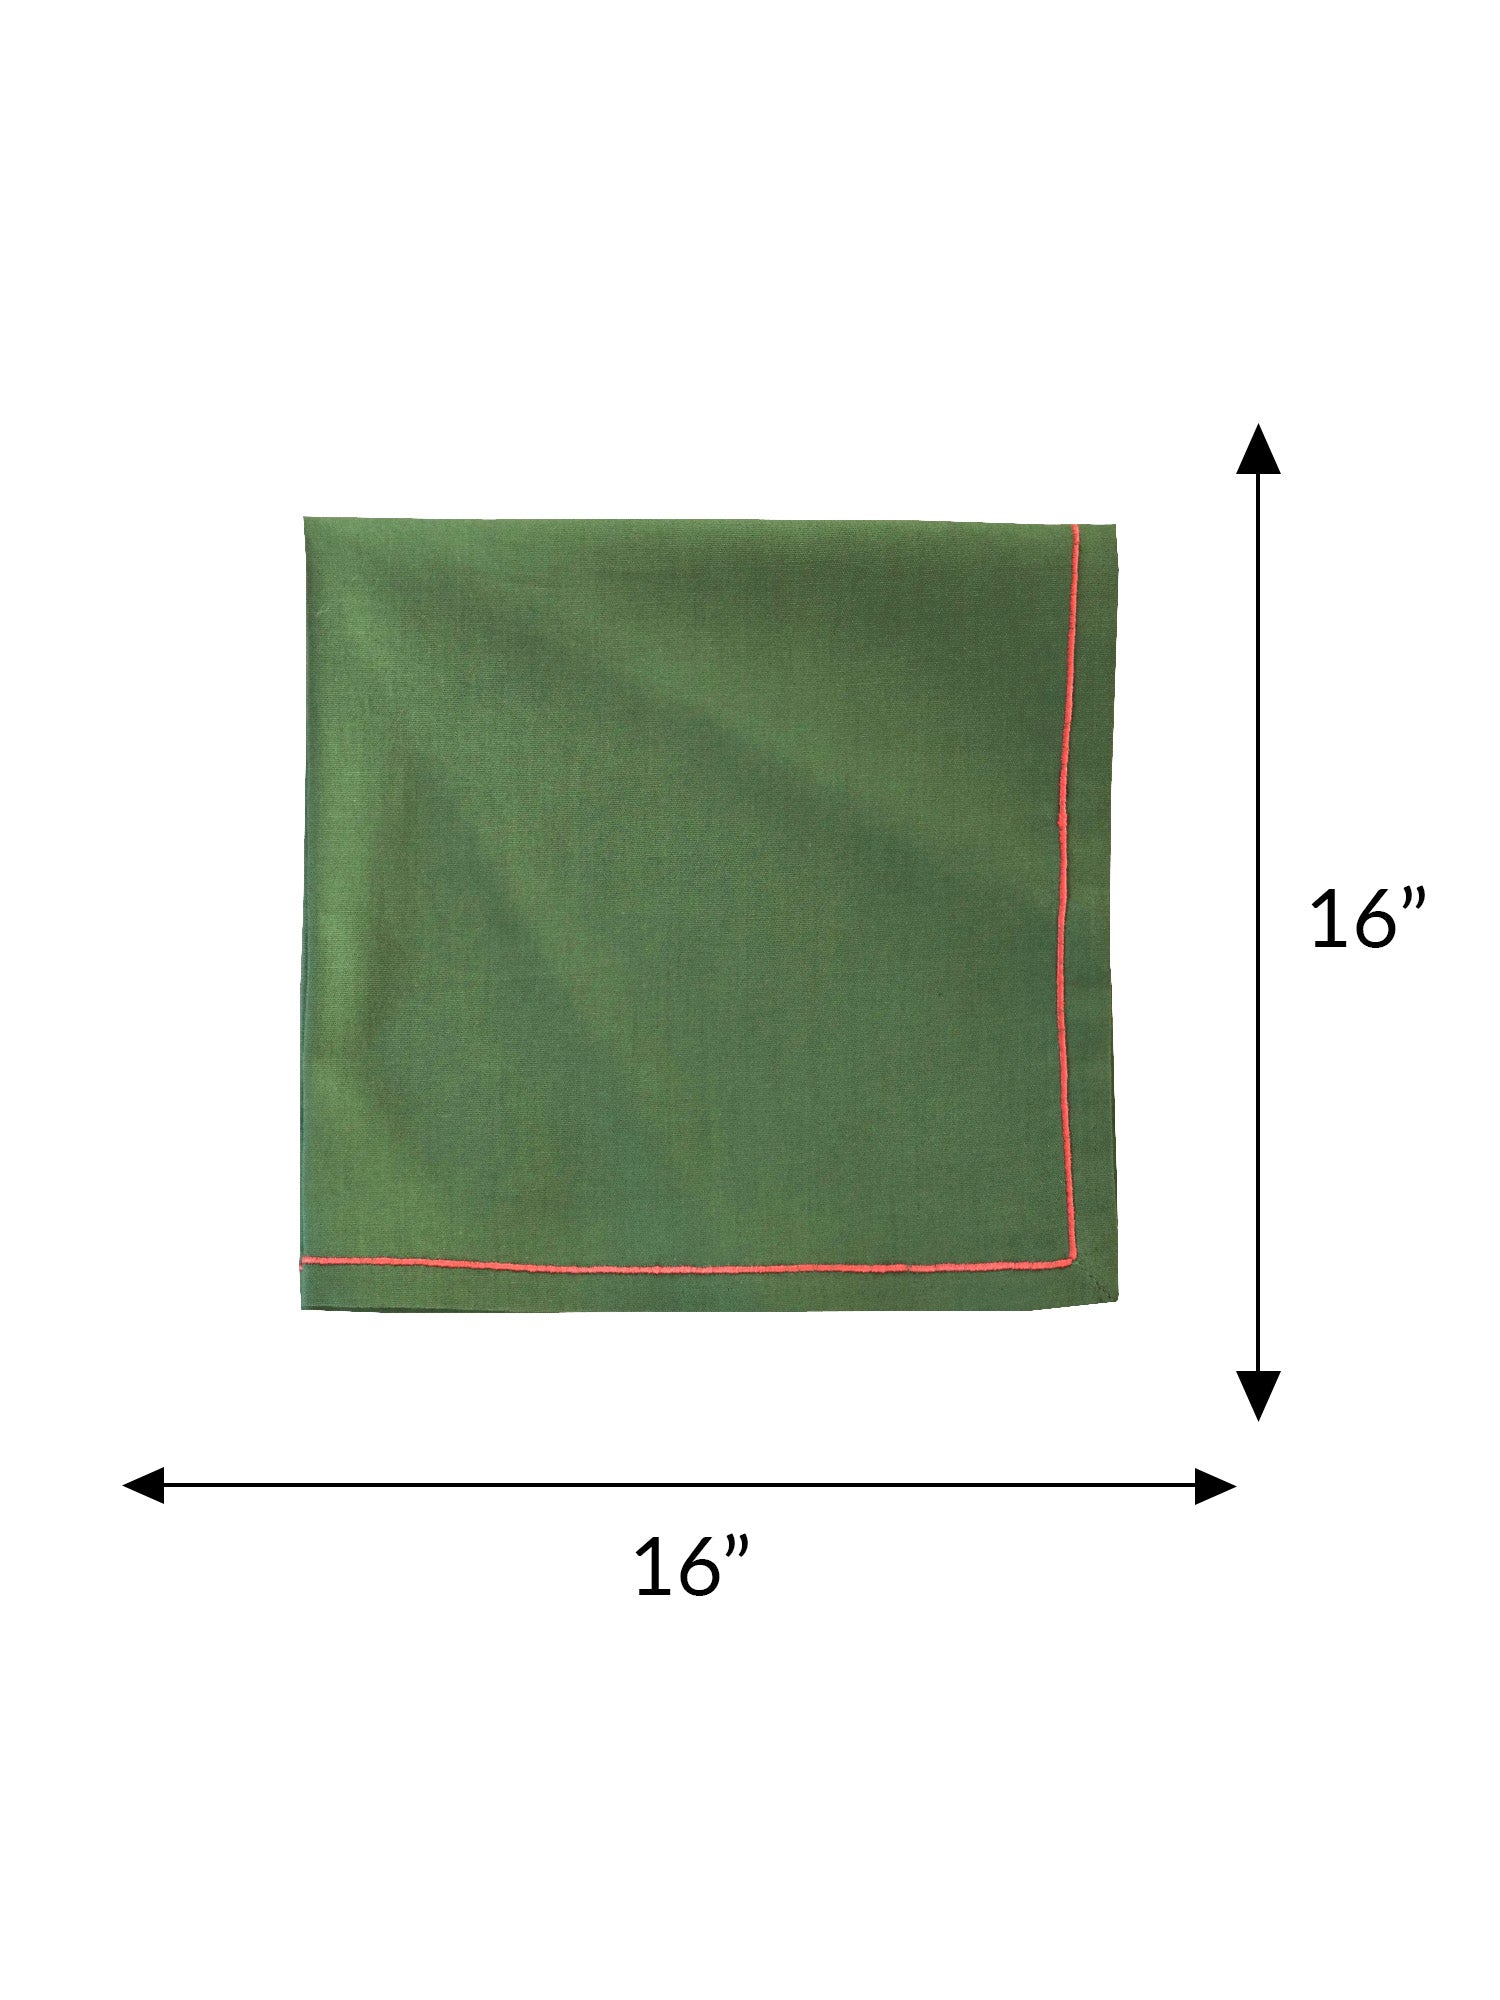 embroidered dinner napkin in green and pink shades - 16x16 inch